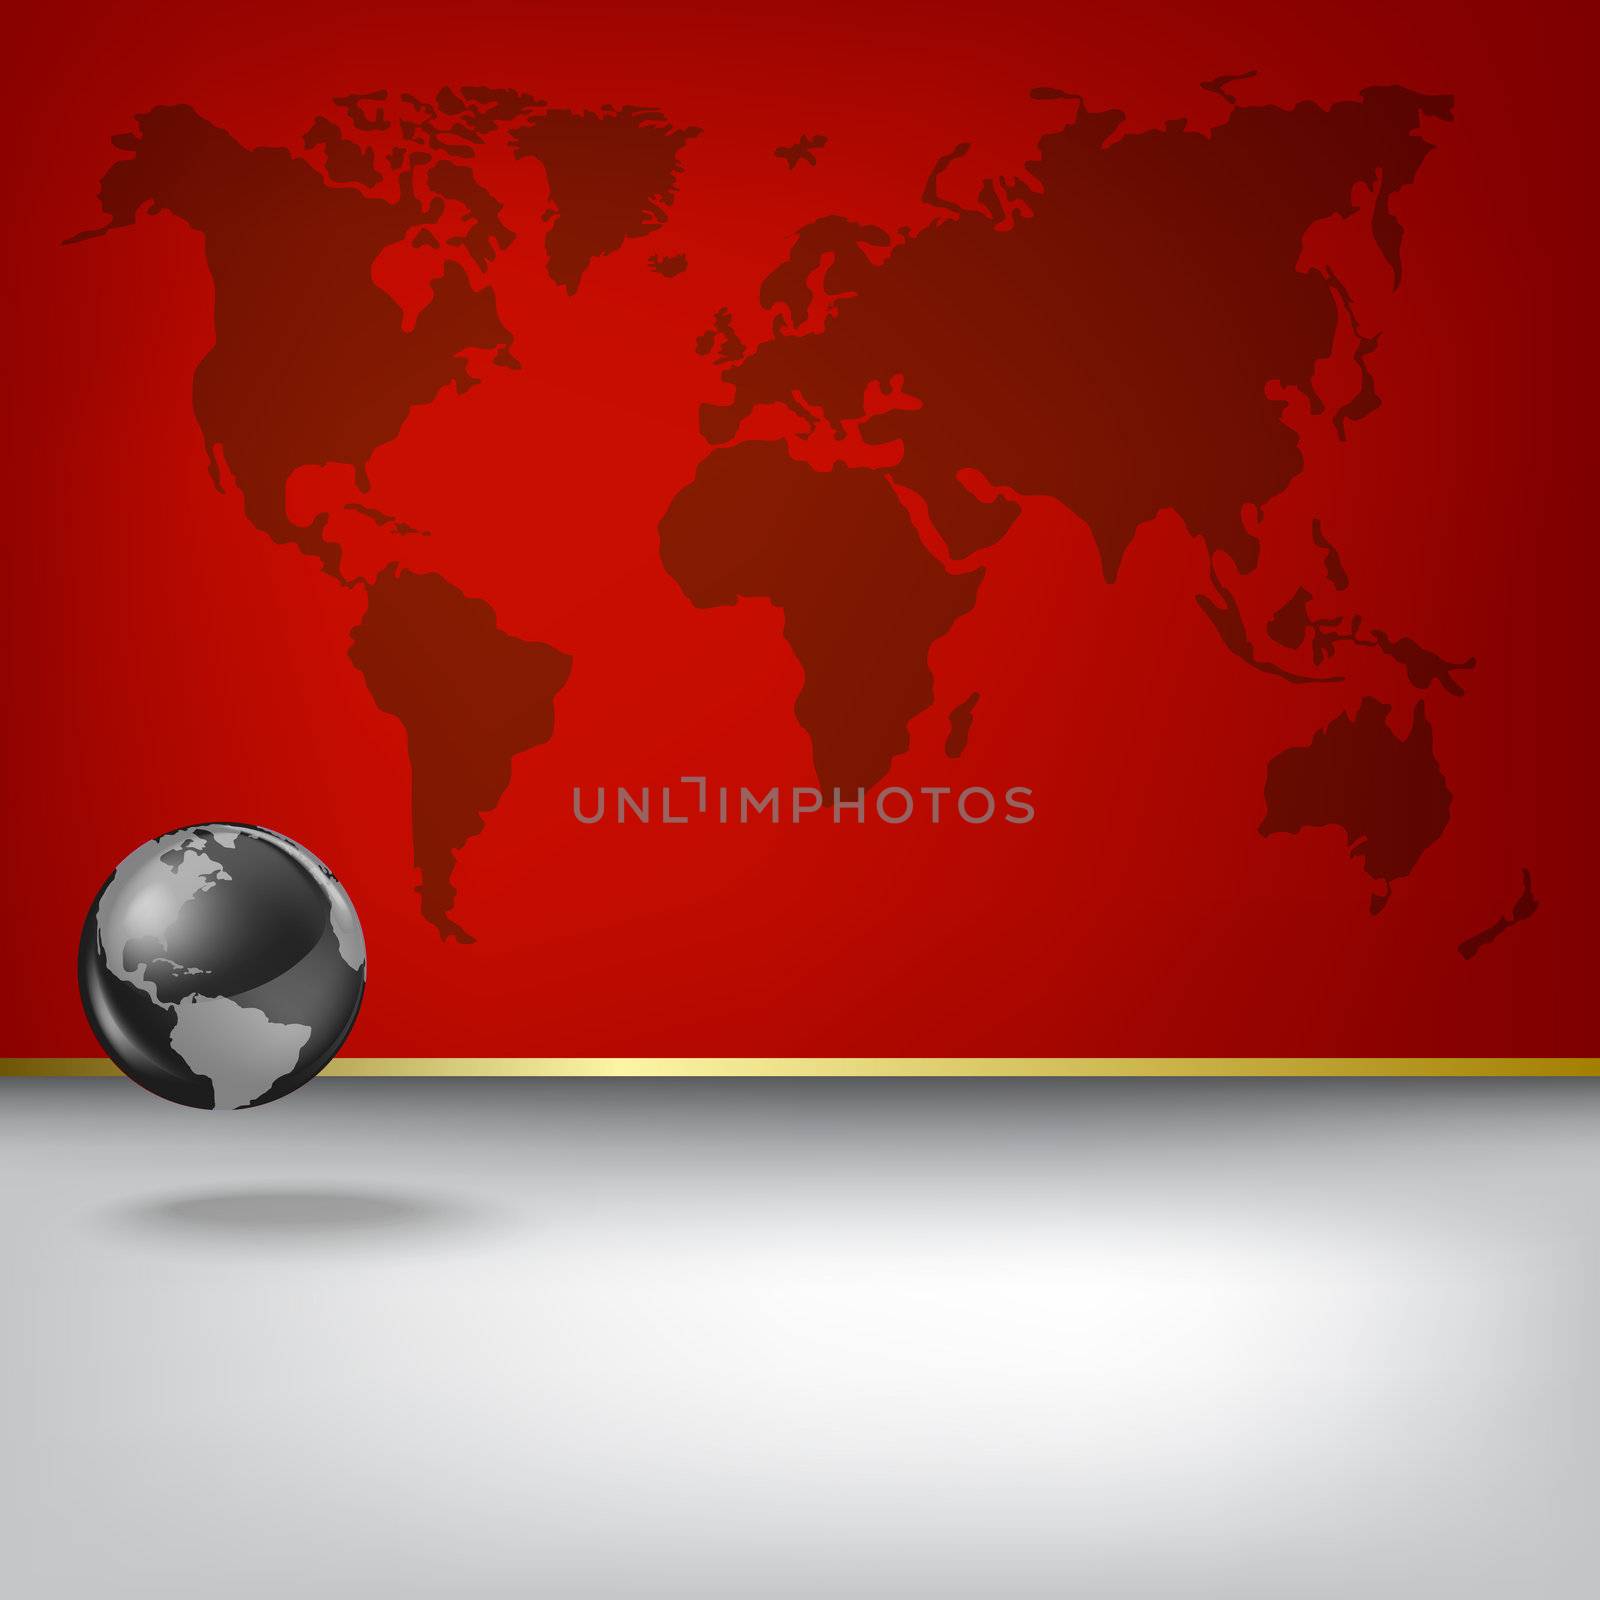 Abstract business background with red map and globe